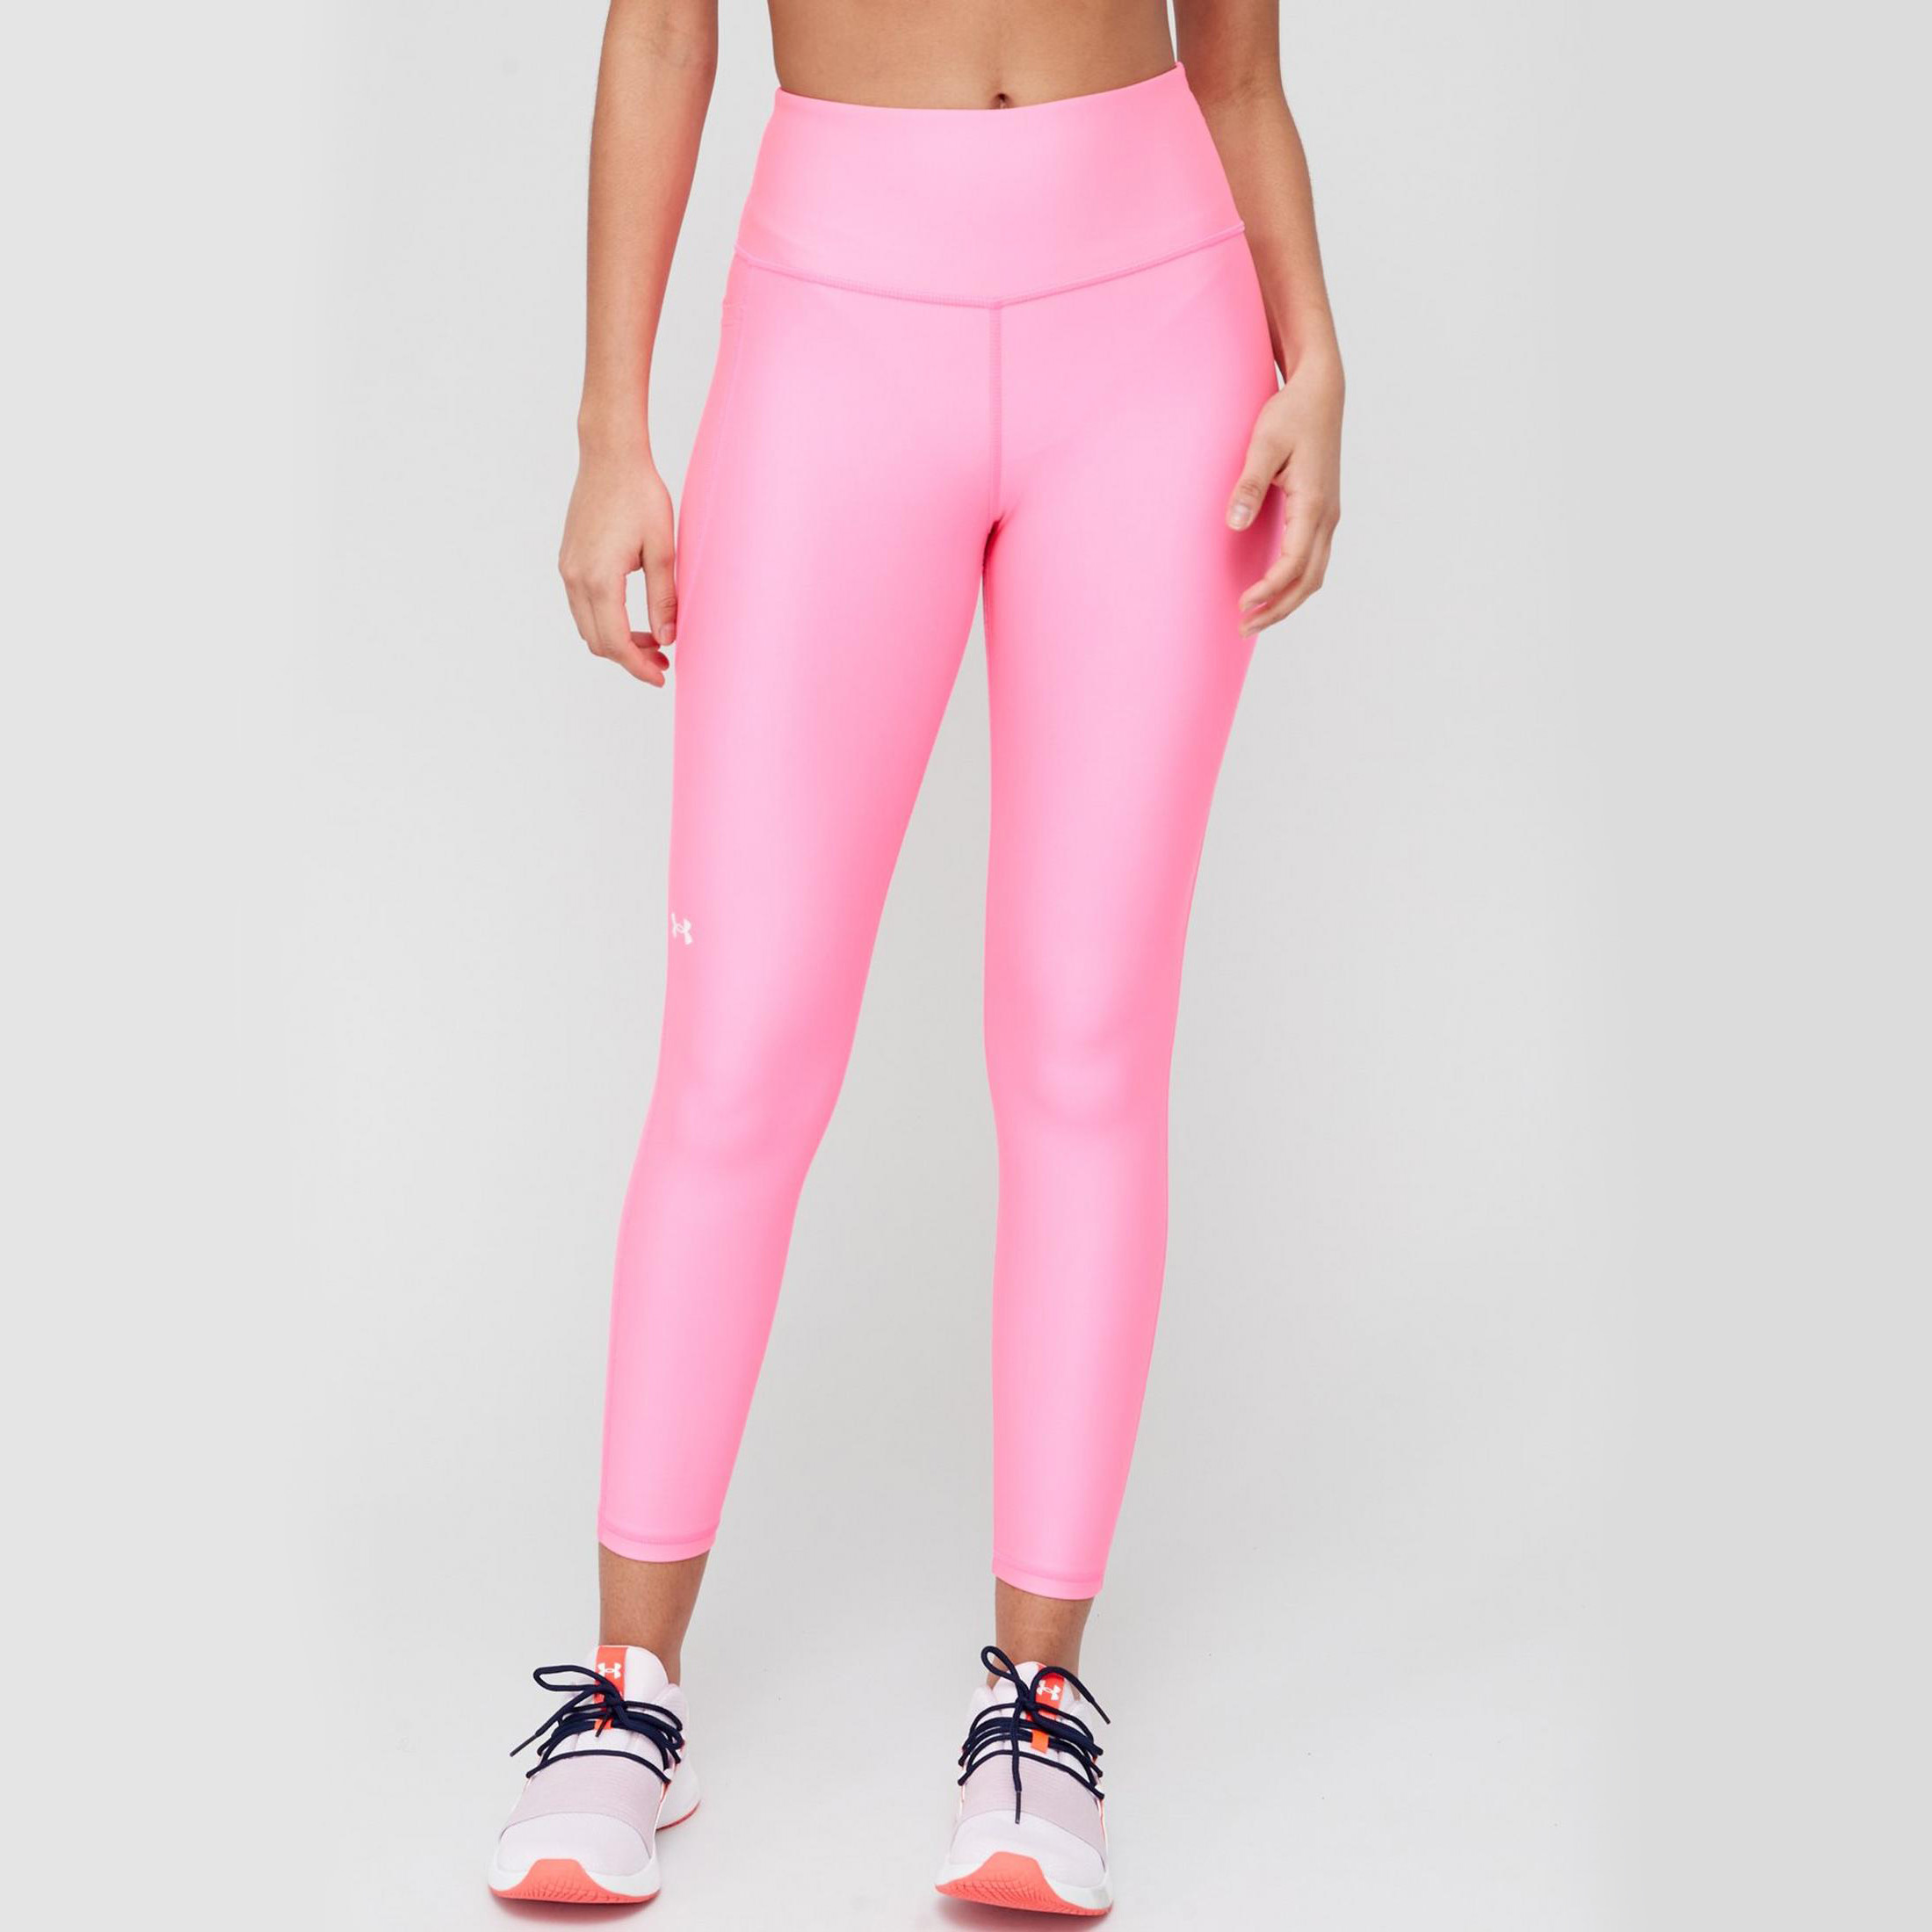 Under Armour Training Heat Gear ankle length leggings in hot pink